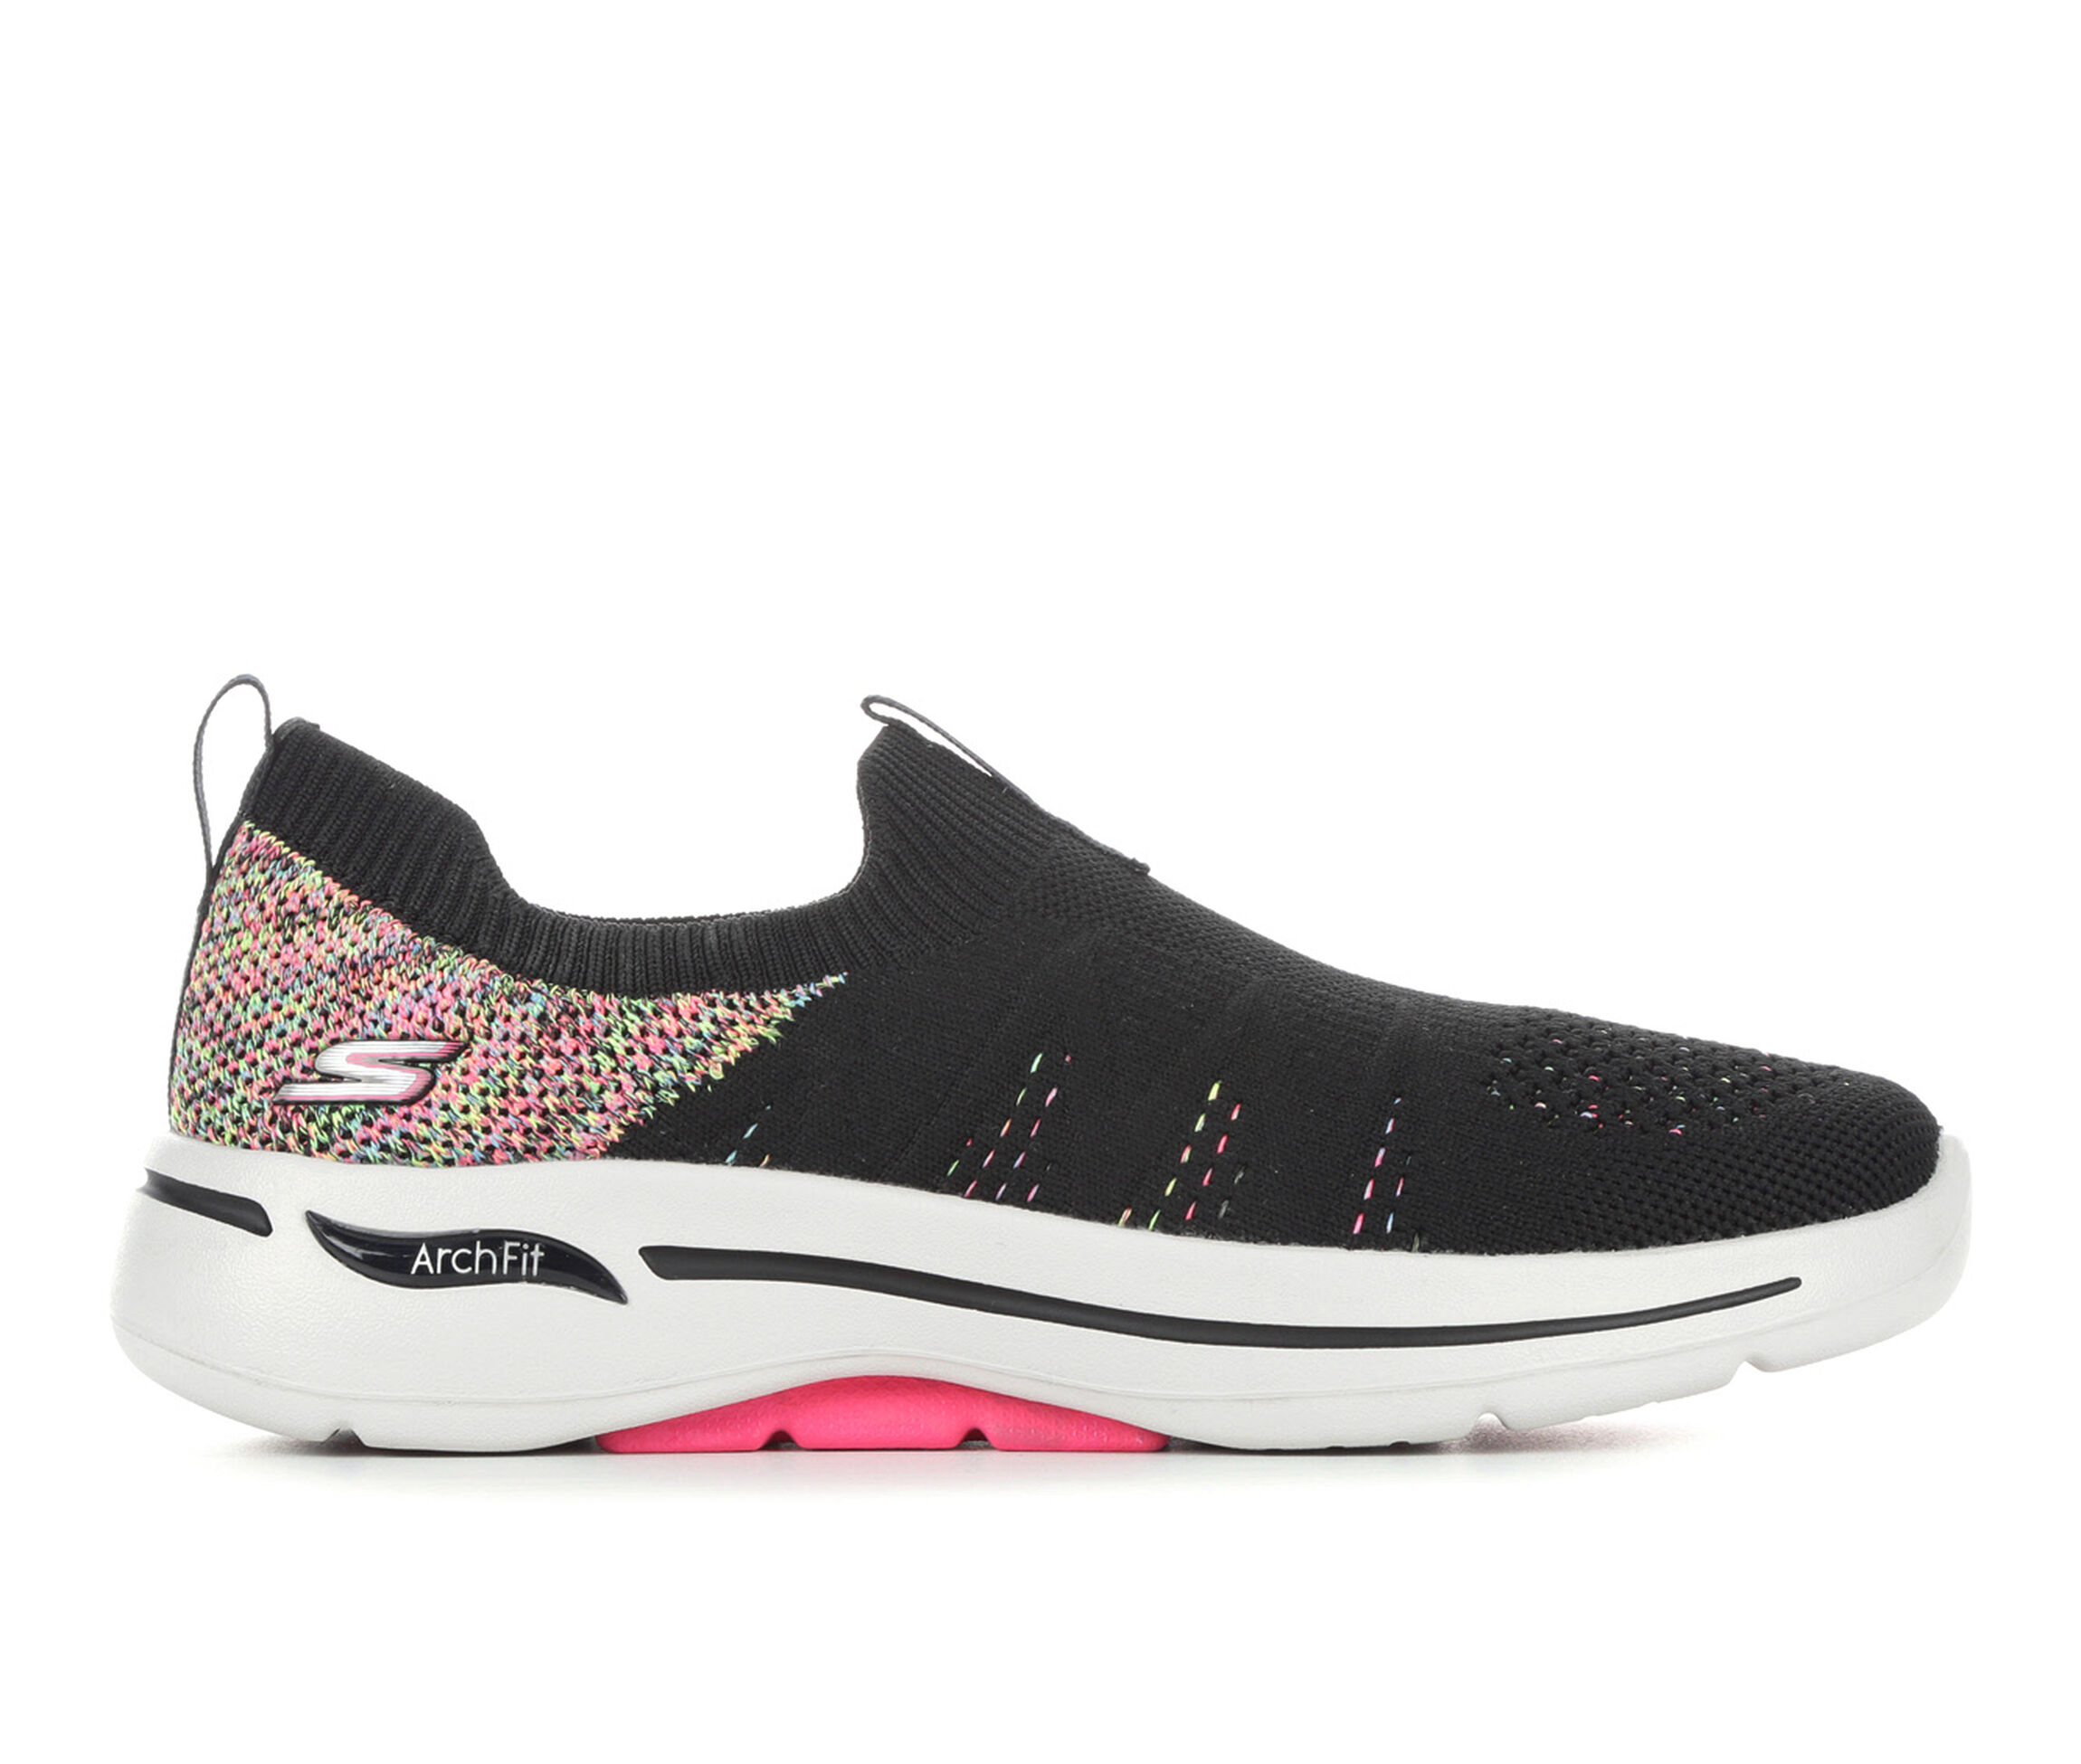 Get the Women's Skechers Go Go Walk Archfit Fun Times 124478 Slip-On  Sneakers in Black Size 9.5 Medium from Shoe Carnival now | AccuWeather Shop